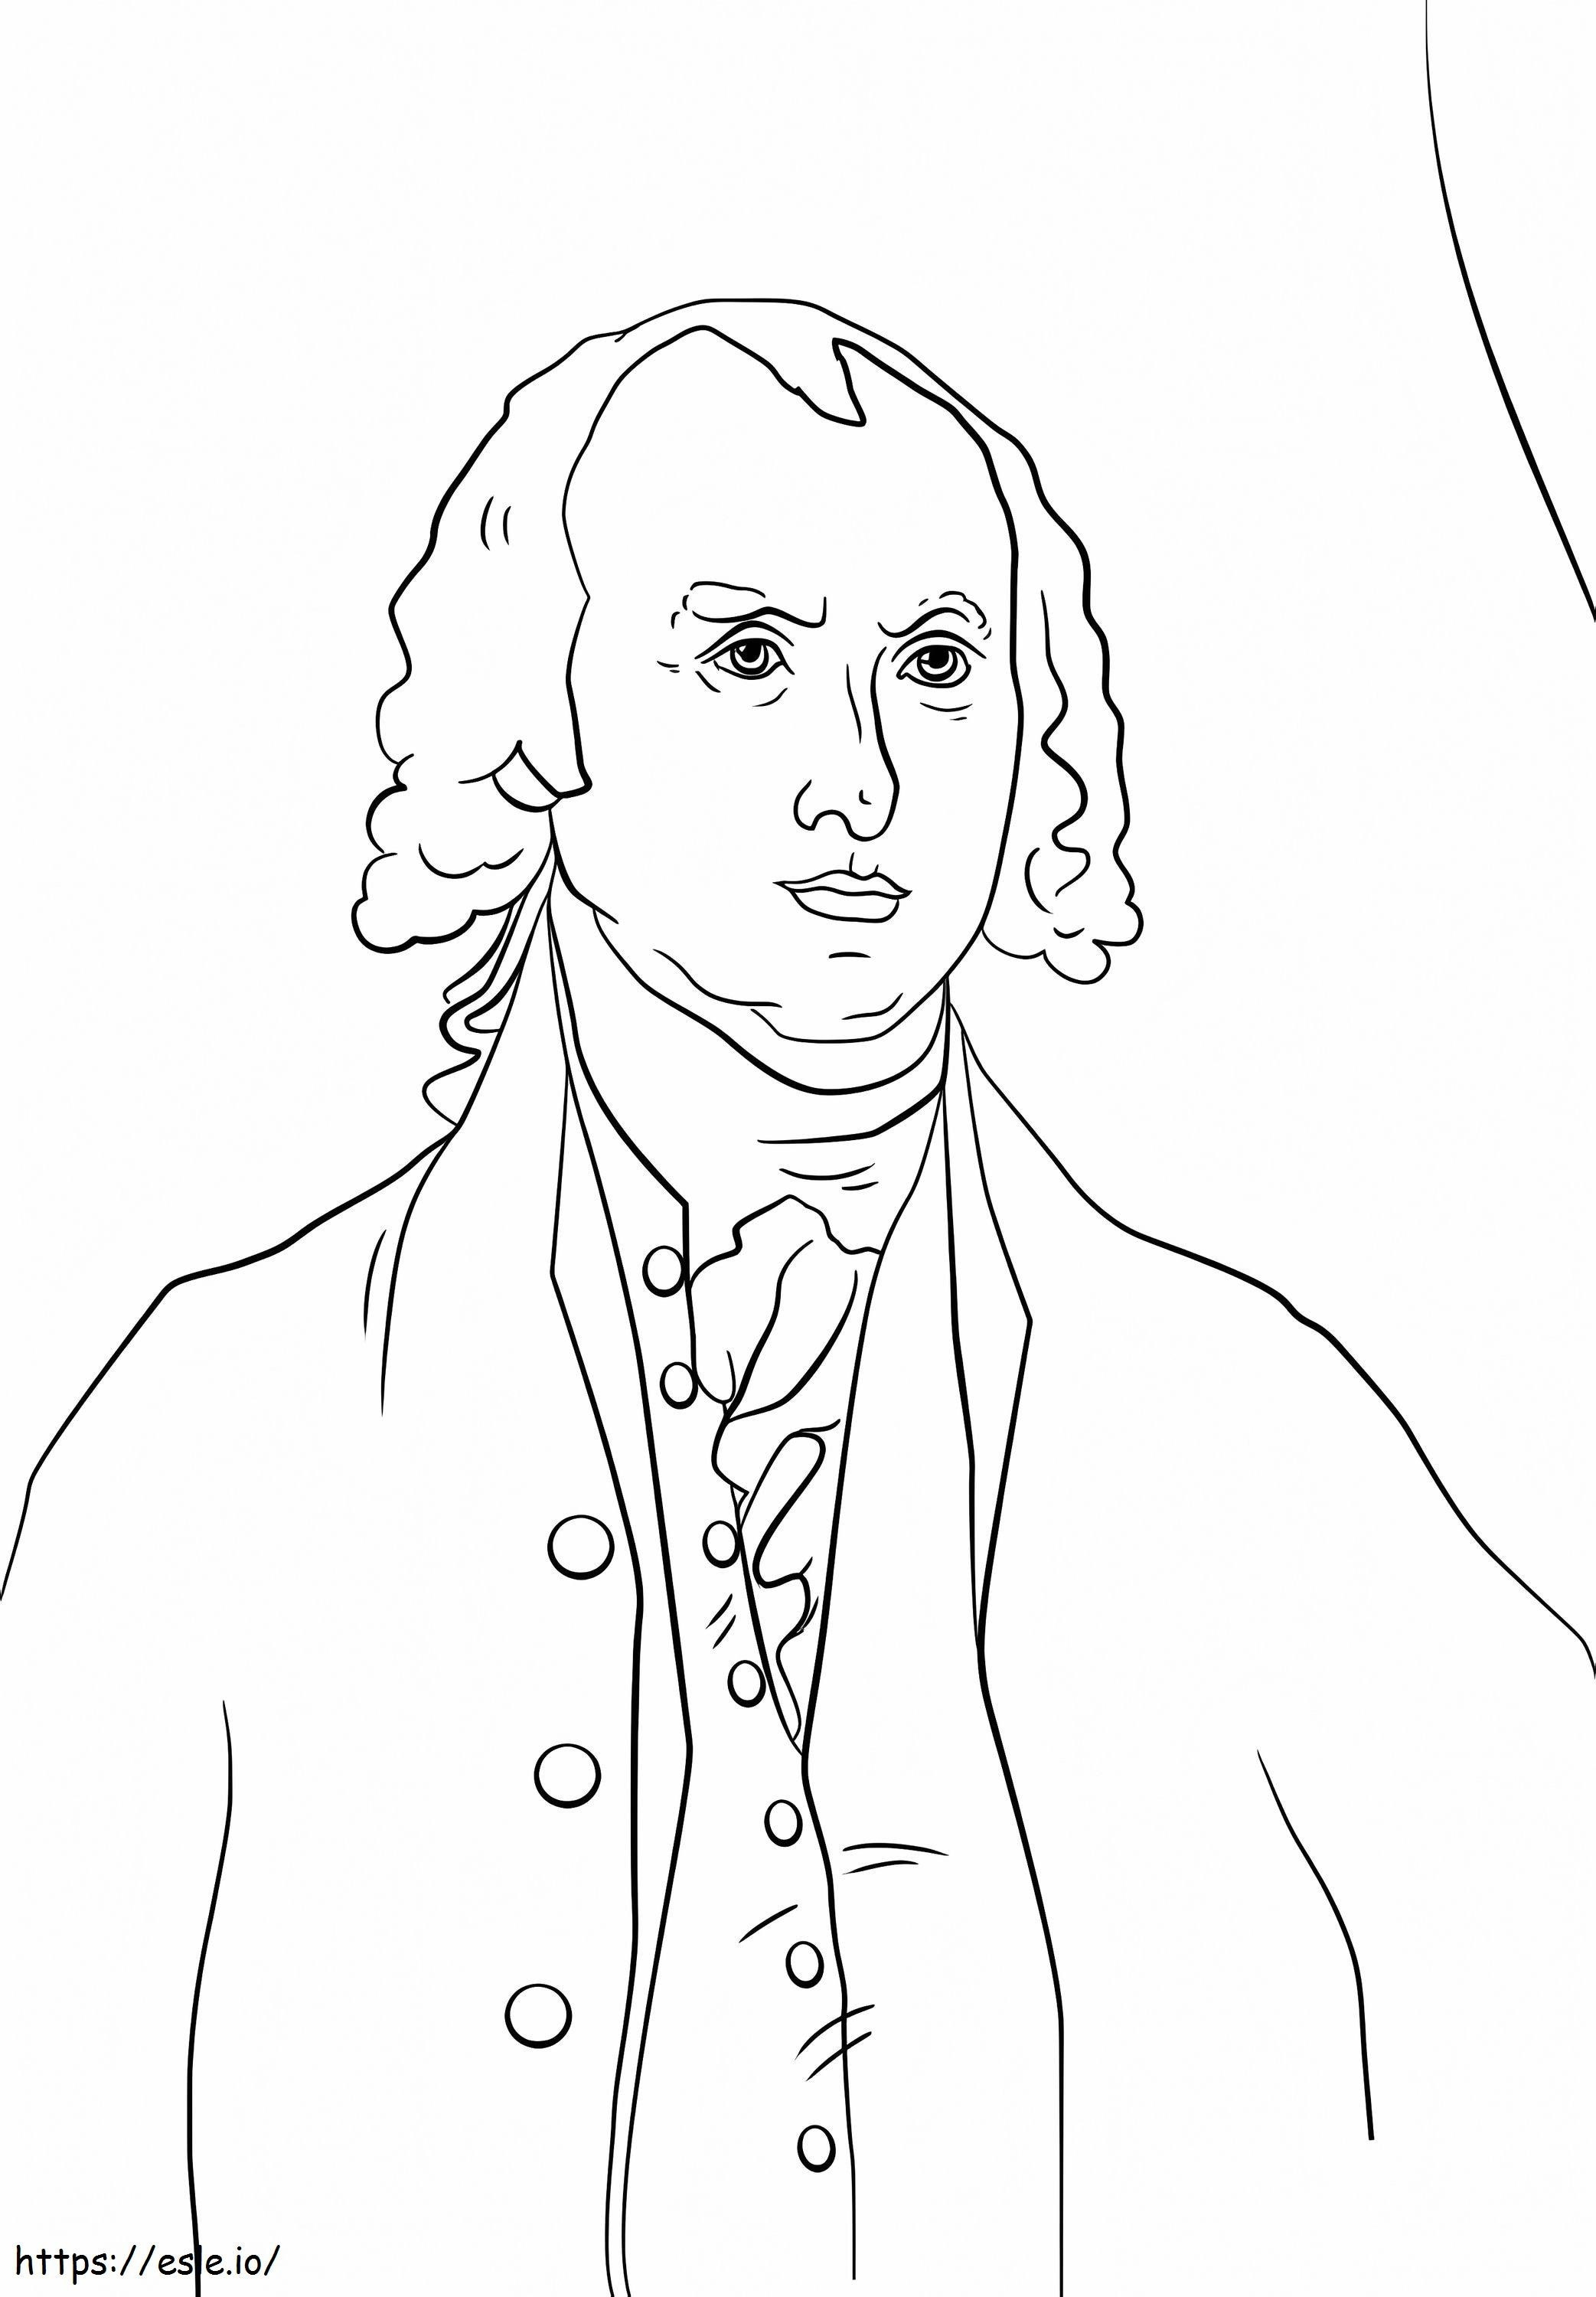 President James Madison coloring page